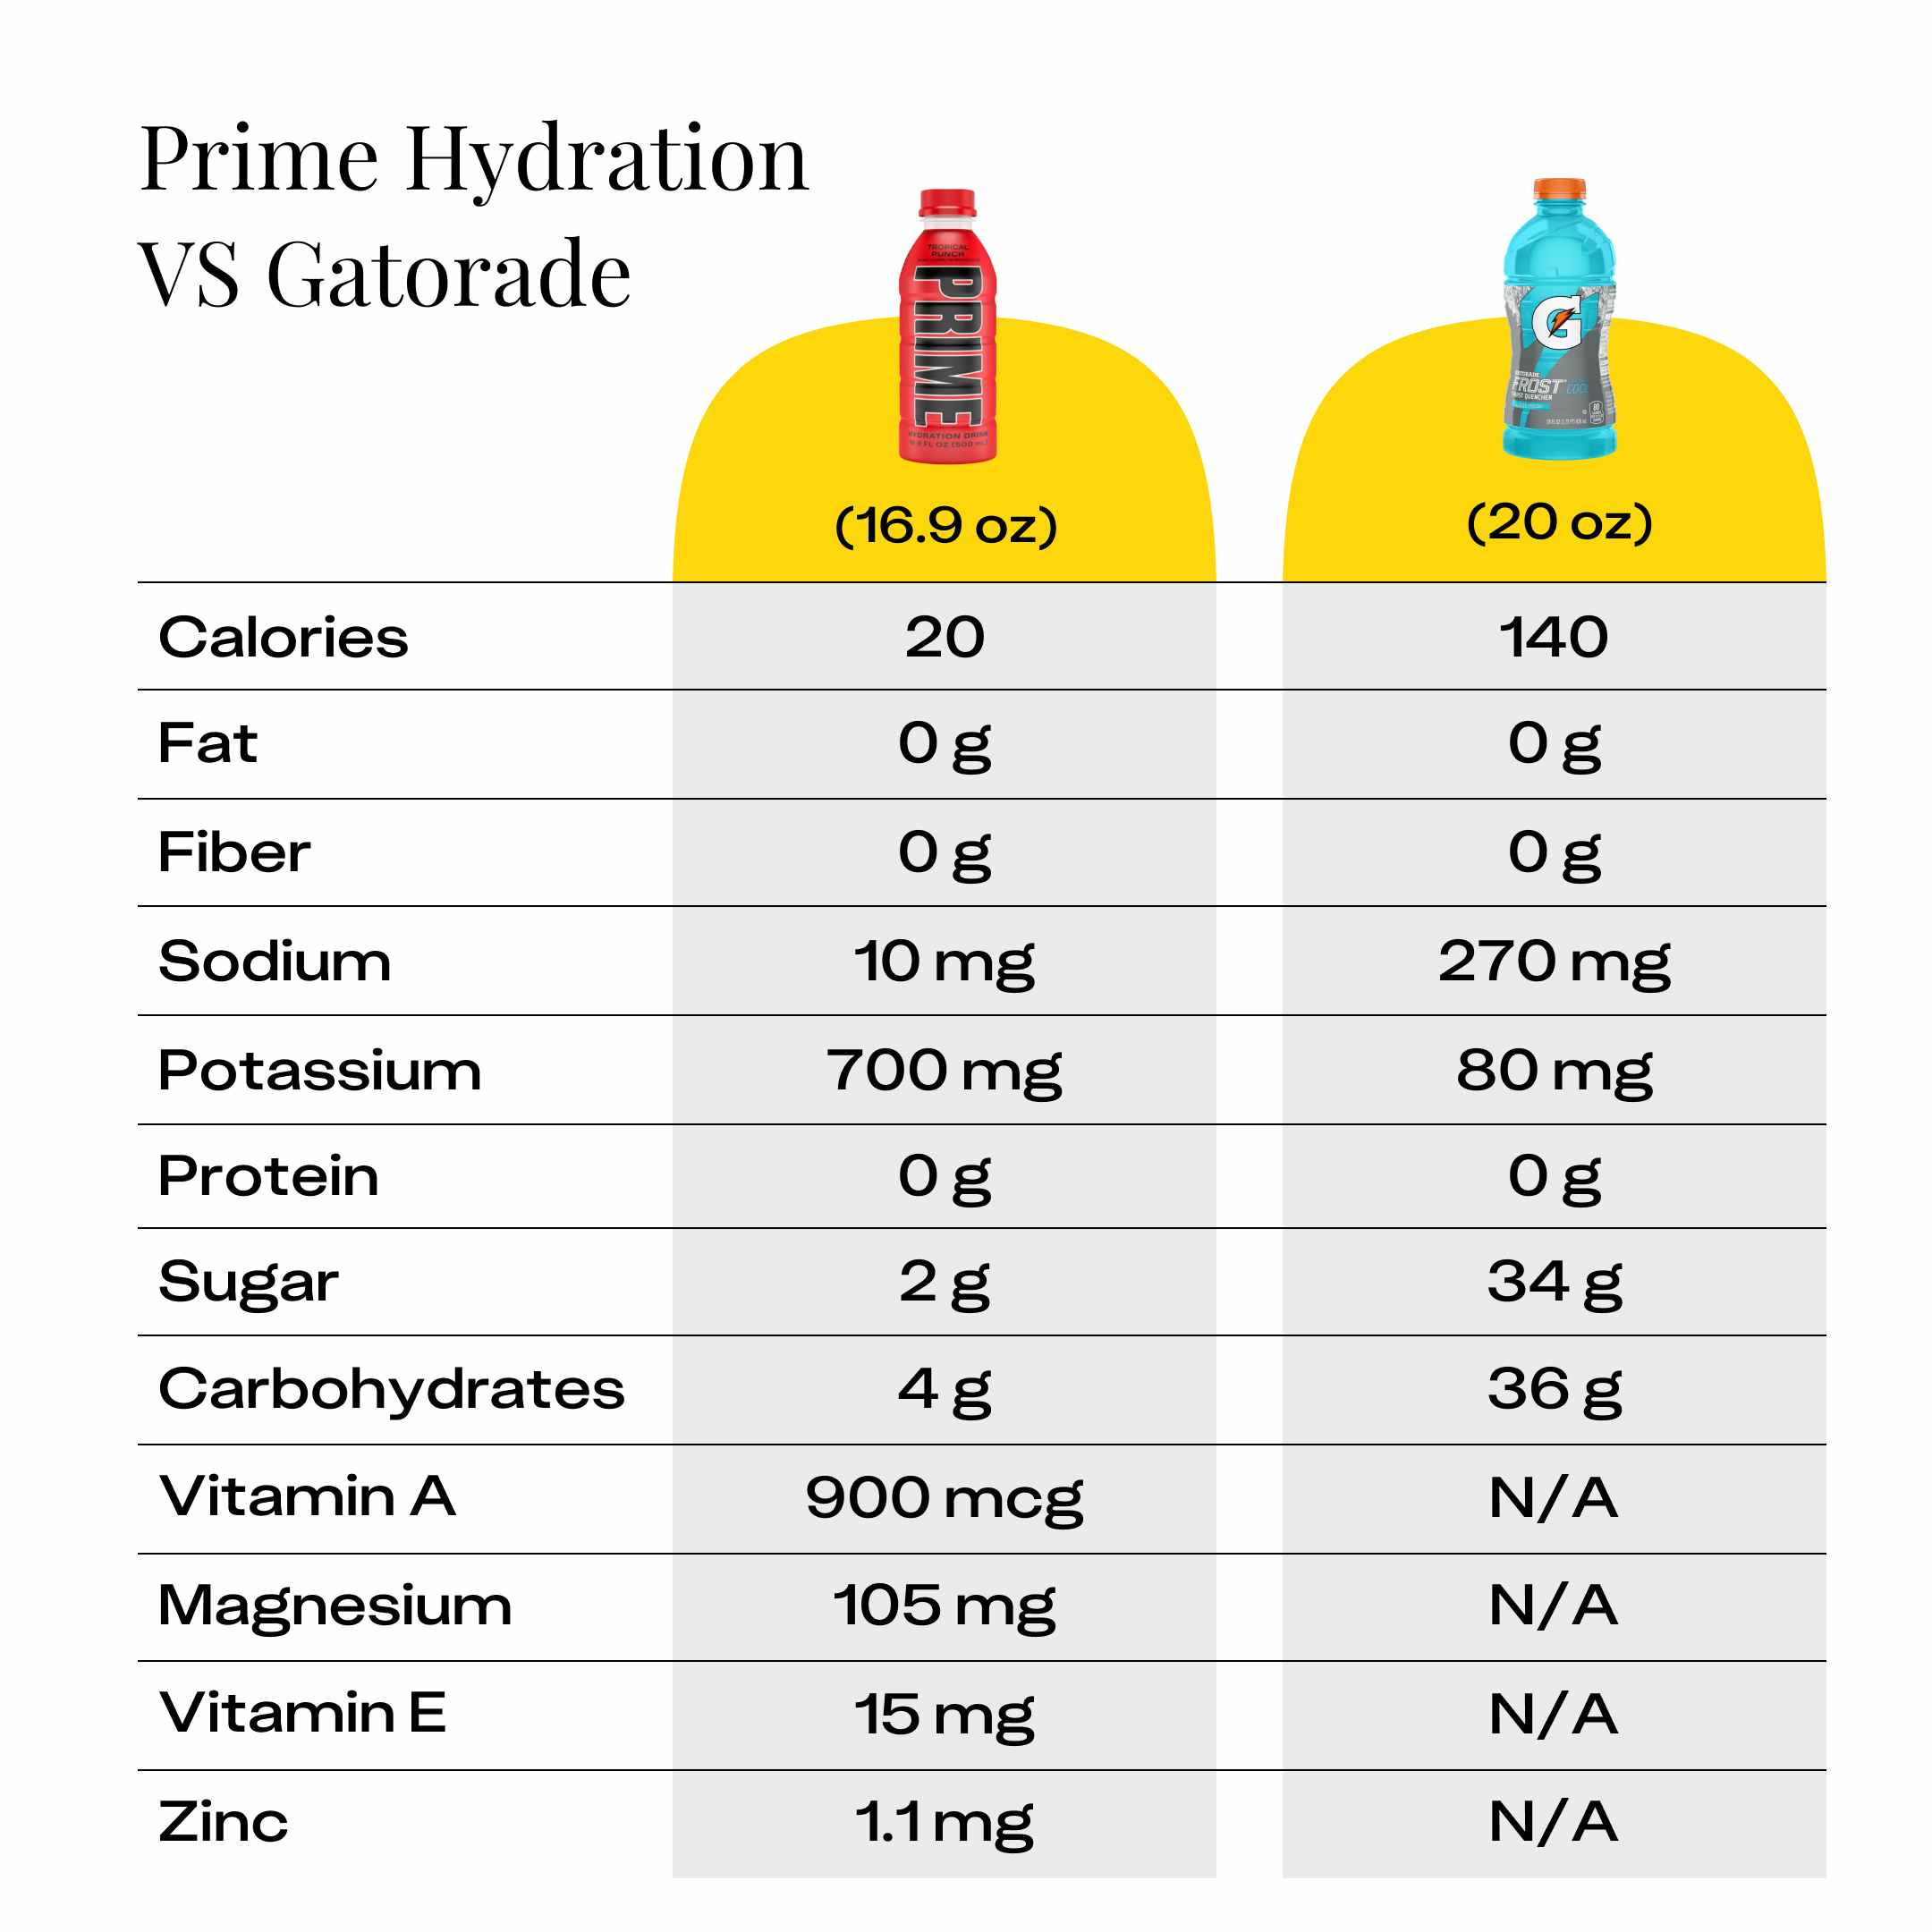 Nutrition facts for a bottle of Prime Hydration versus a bottle of Gatorade.